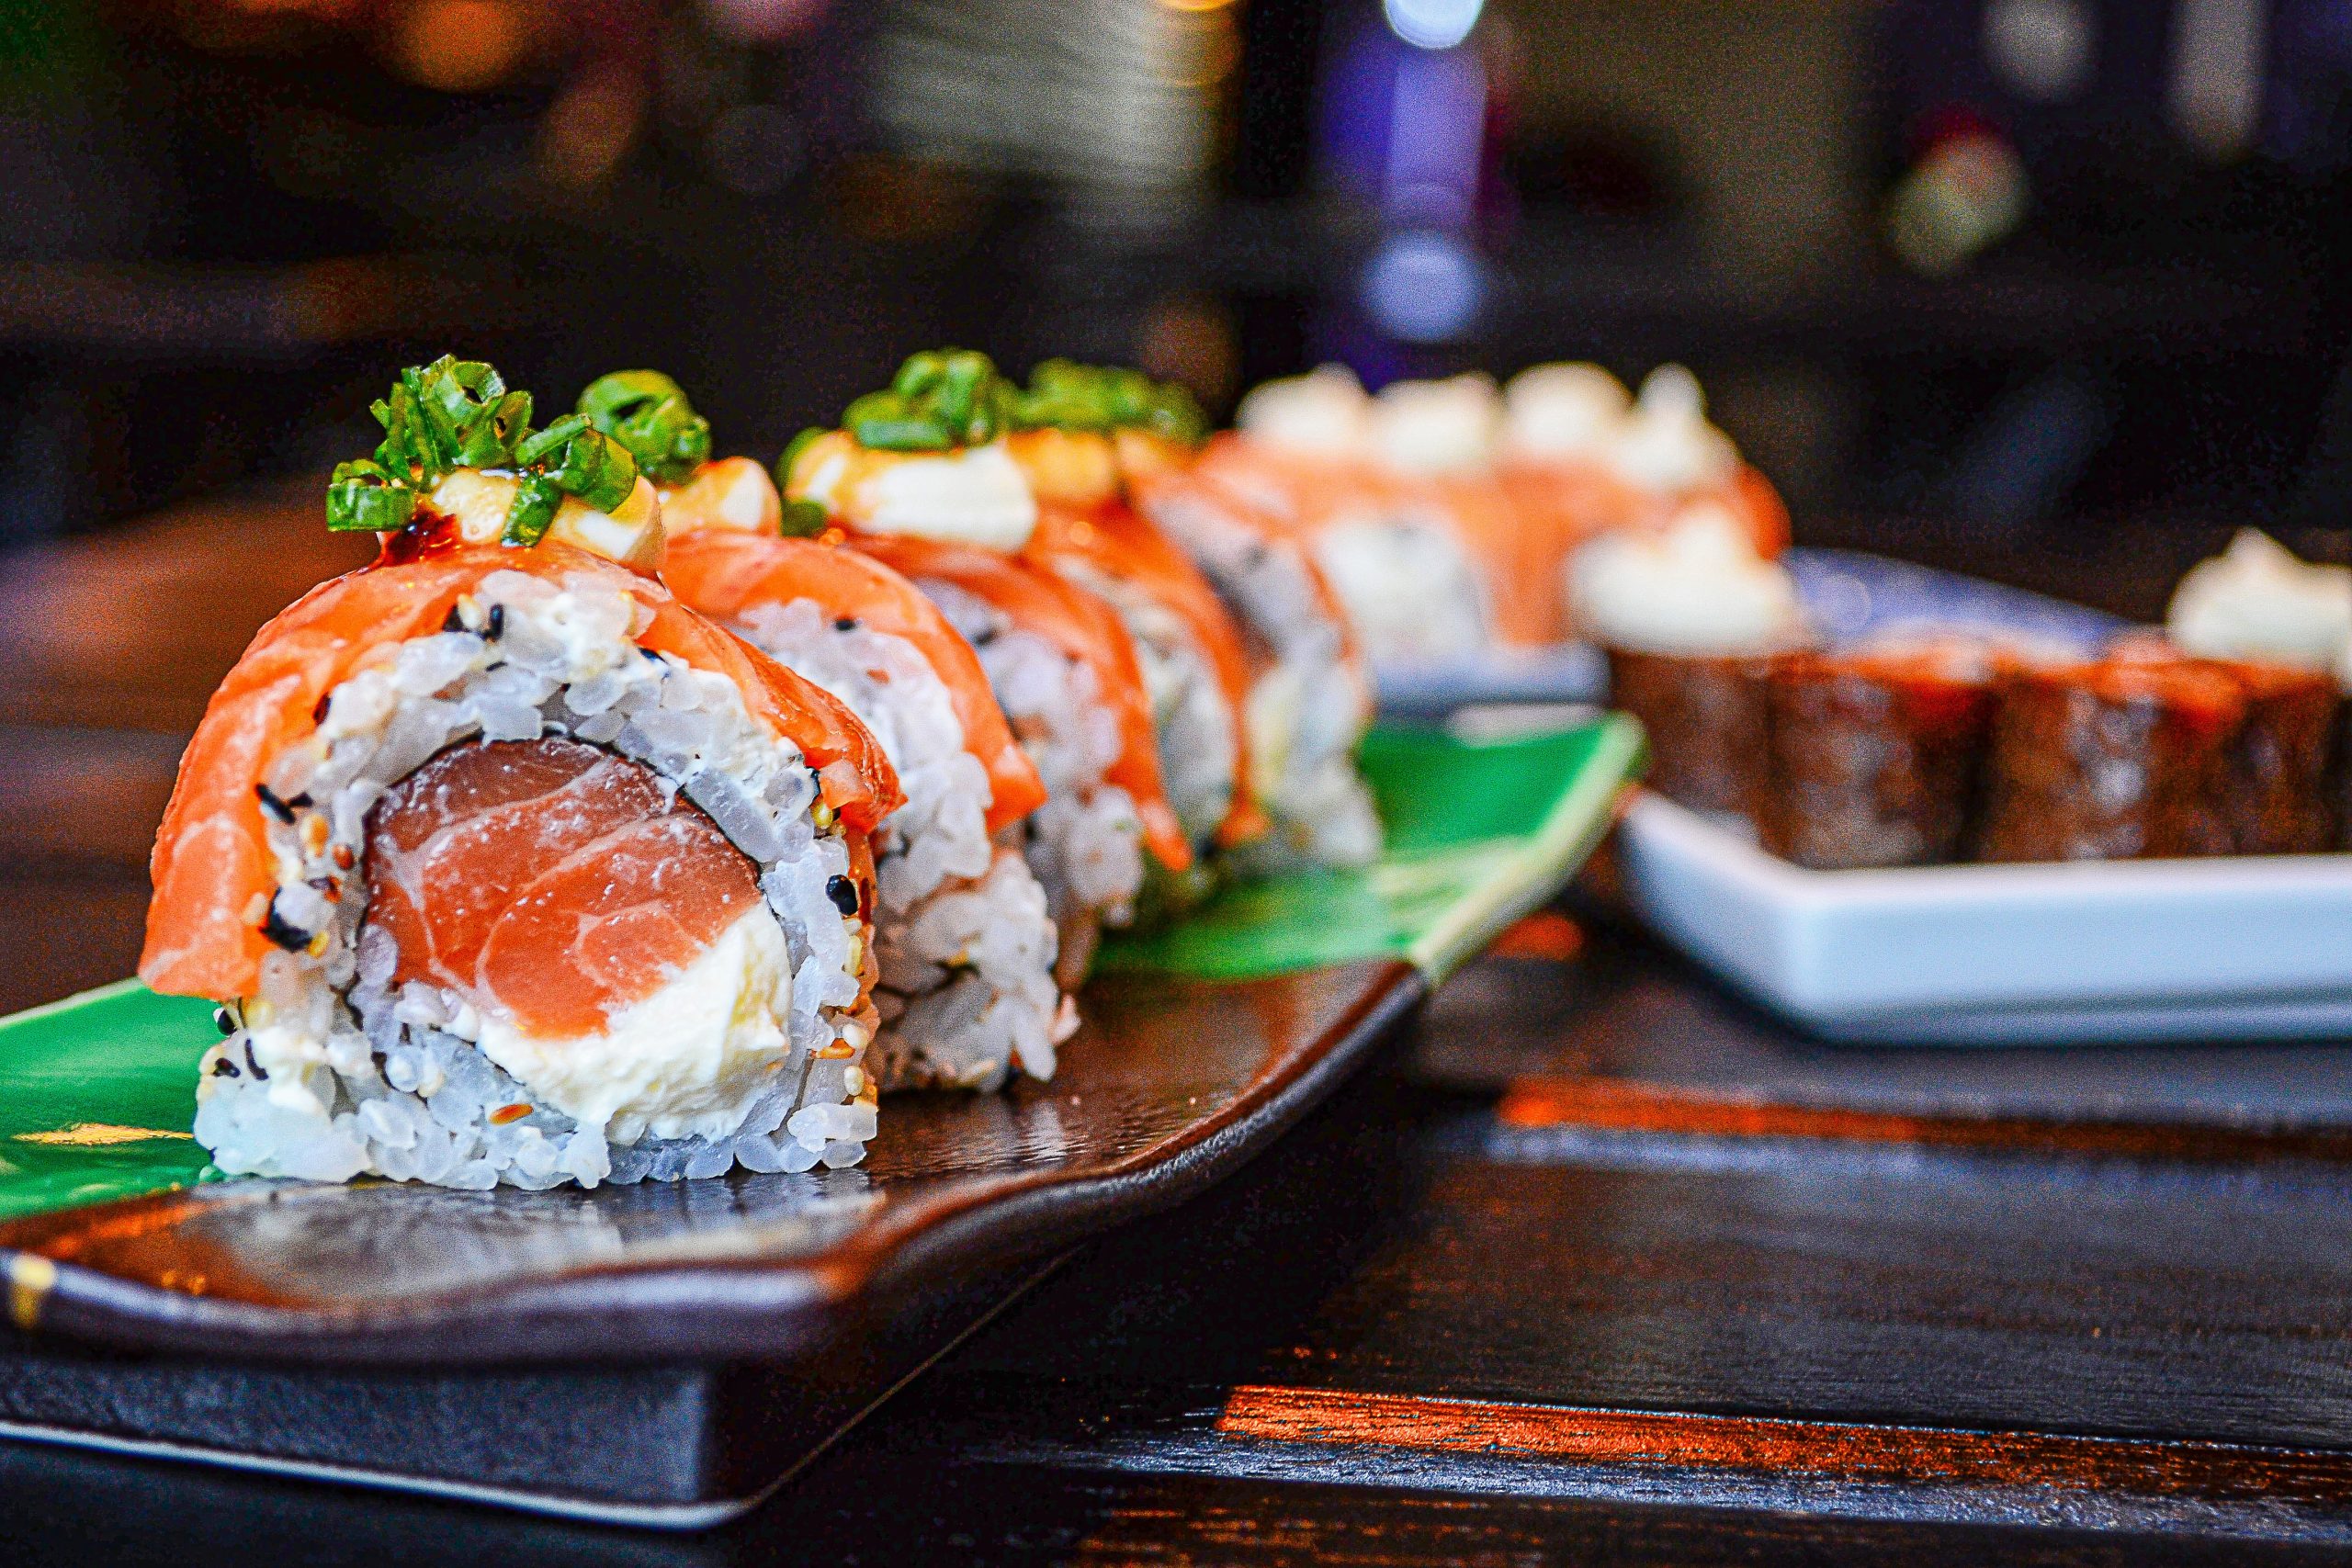 BEBEK RESTAURANT- A RENOWNED CHOICE FOR SUSHI